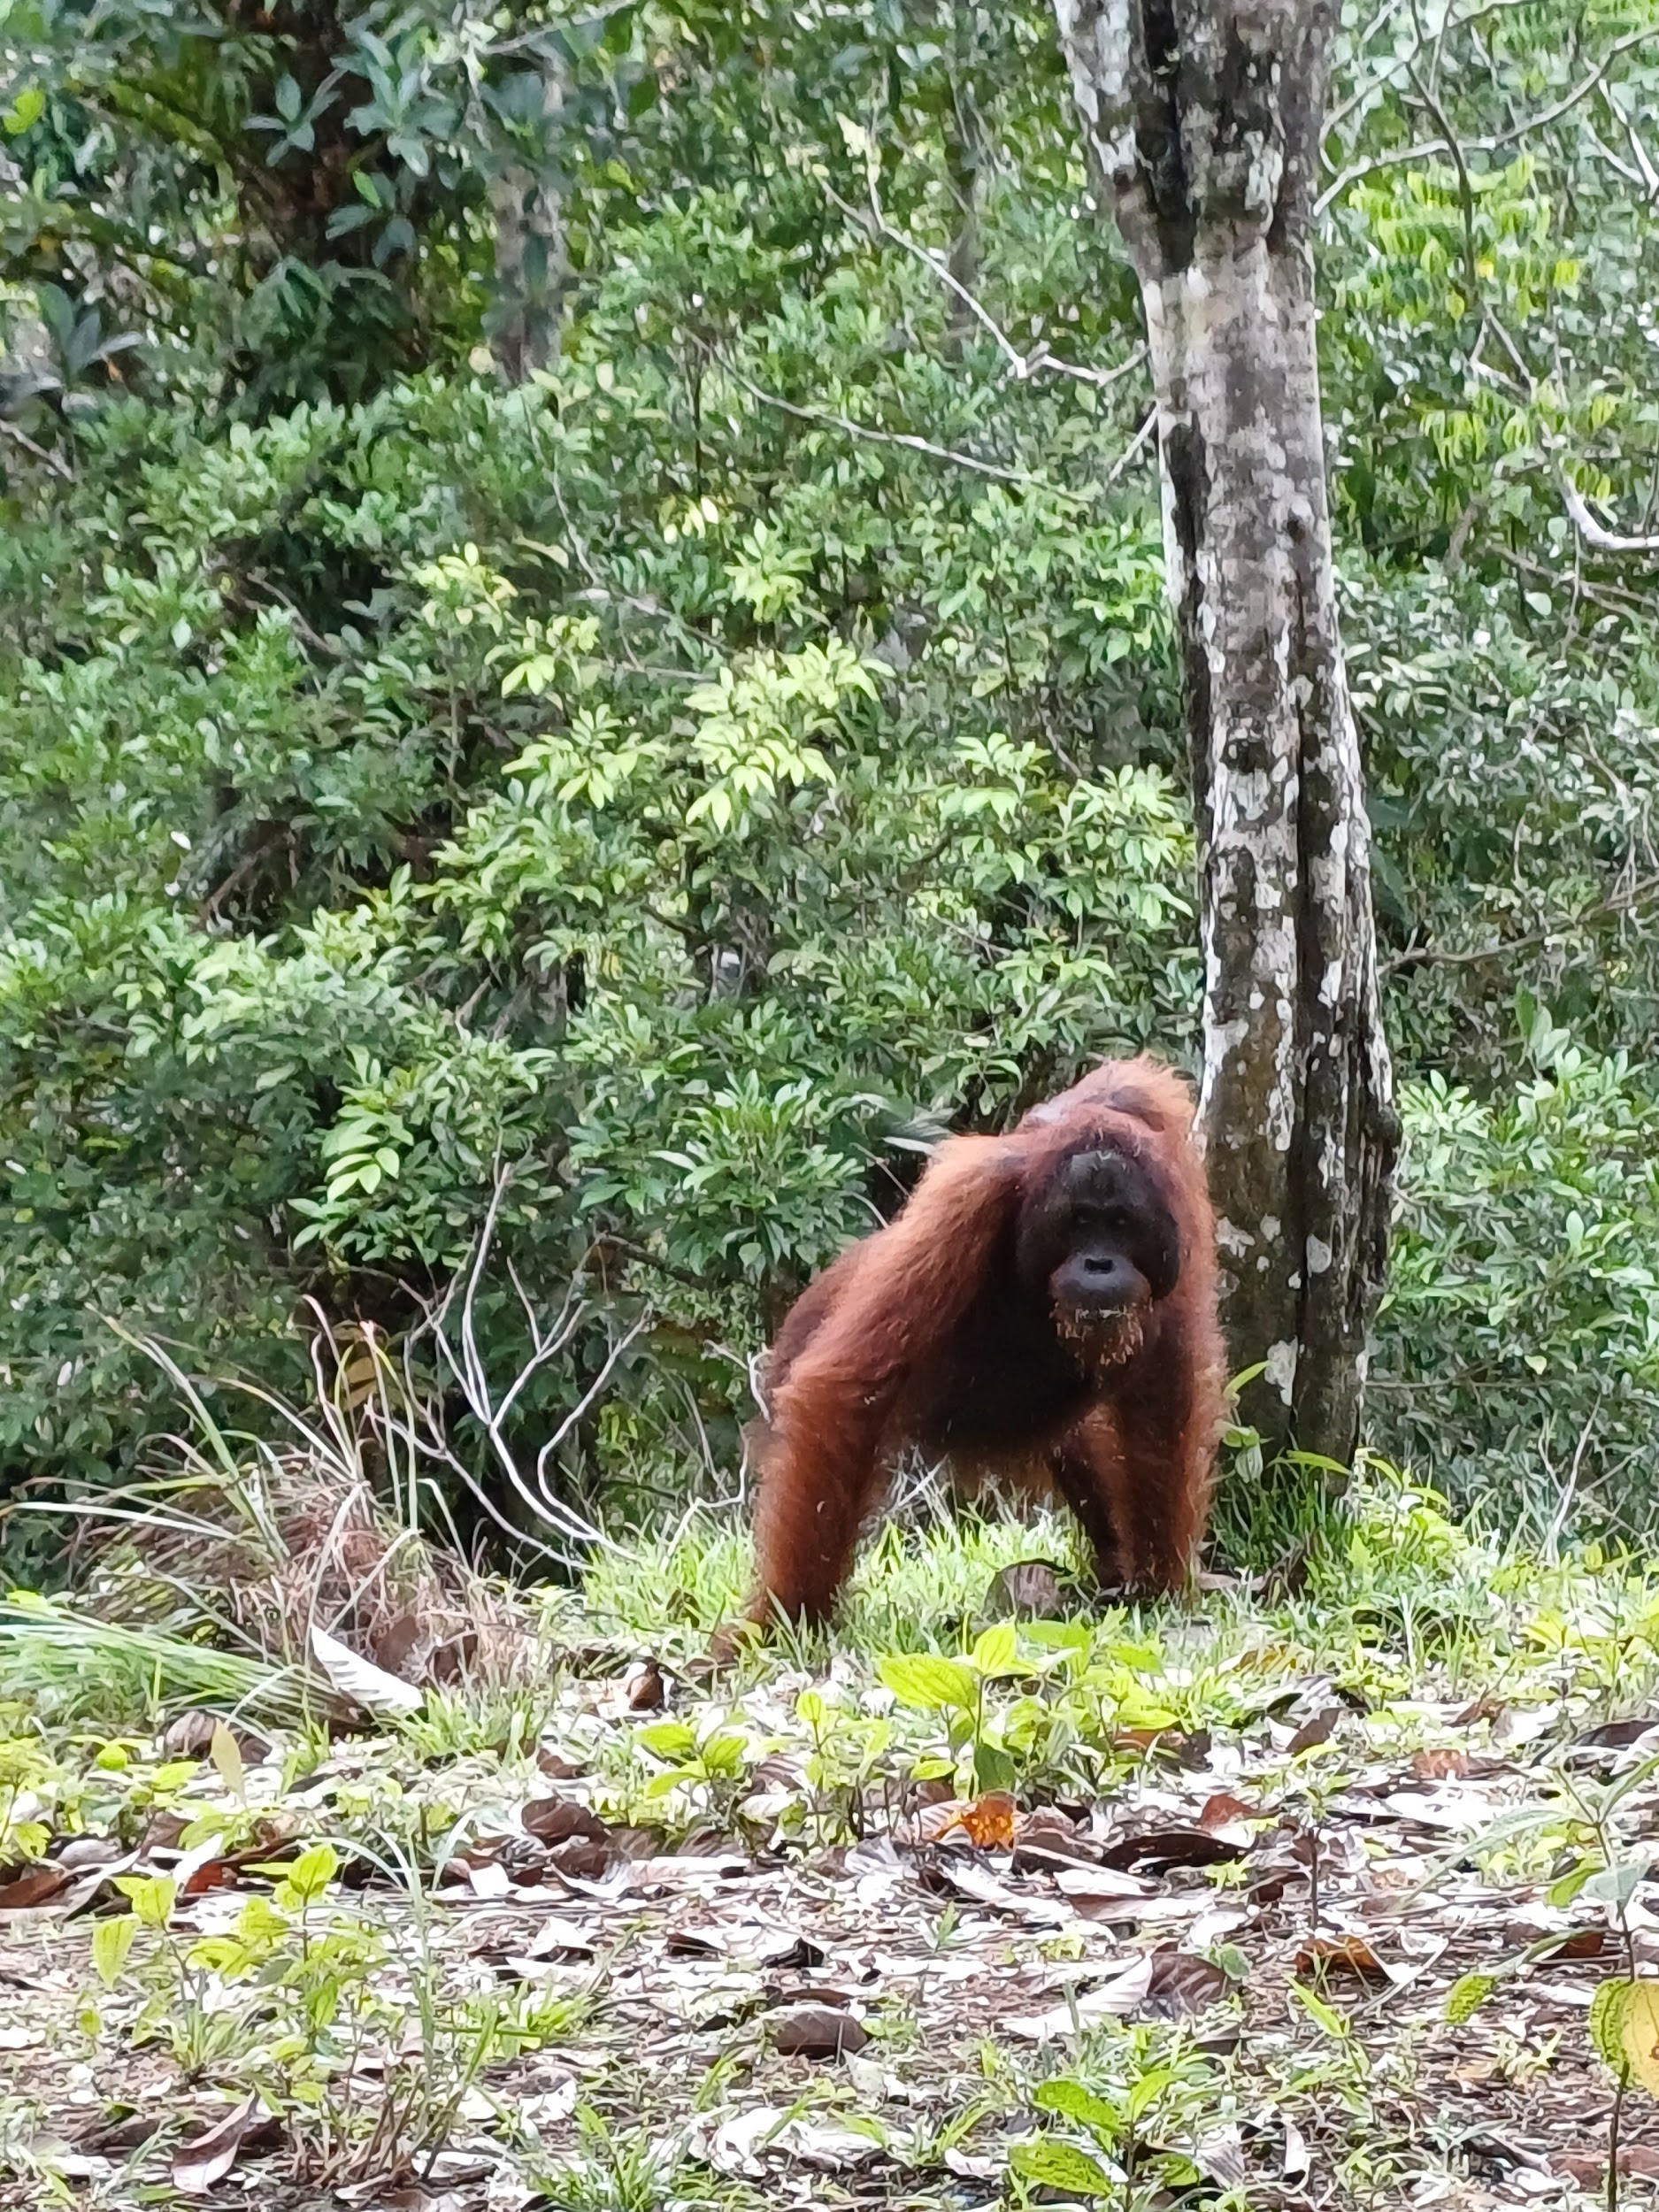 Large male orangutan spotted within the Field Centre. He had just climbed down after a messy snack session and gave us an intimidating stare. Credit: Sudina Thapa.